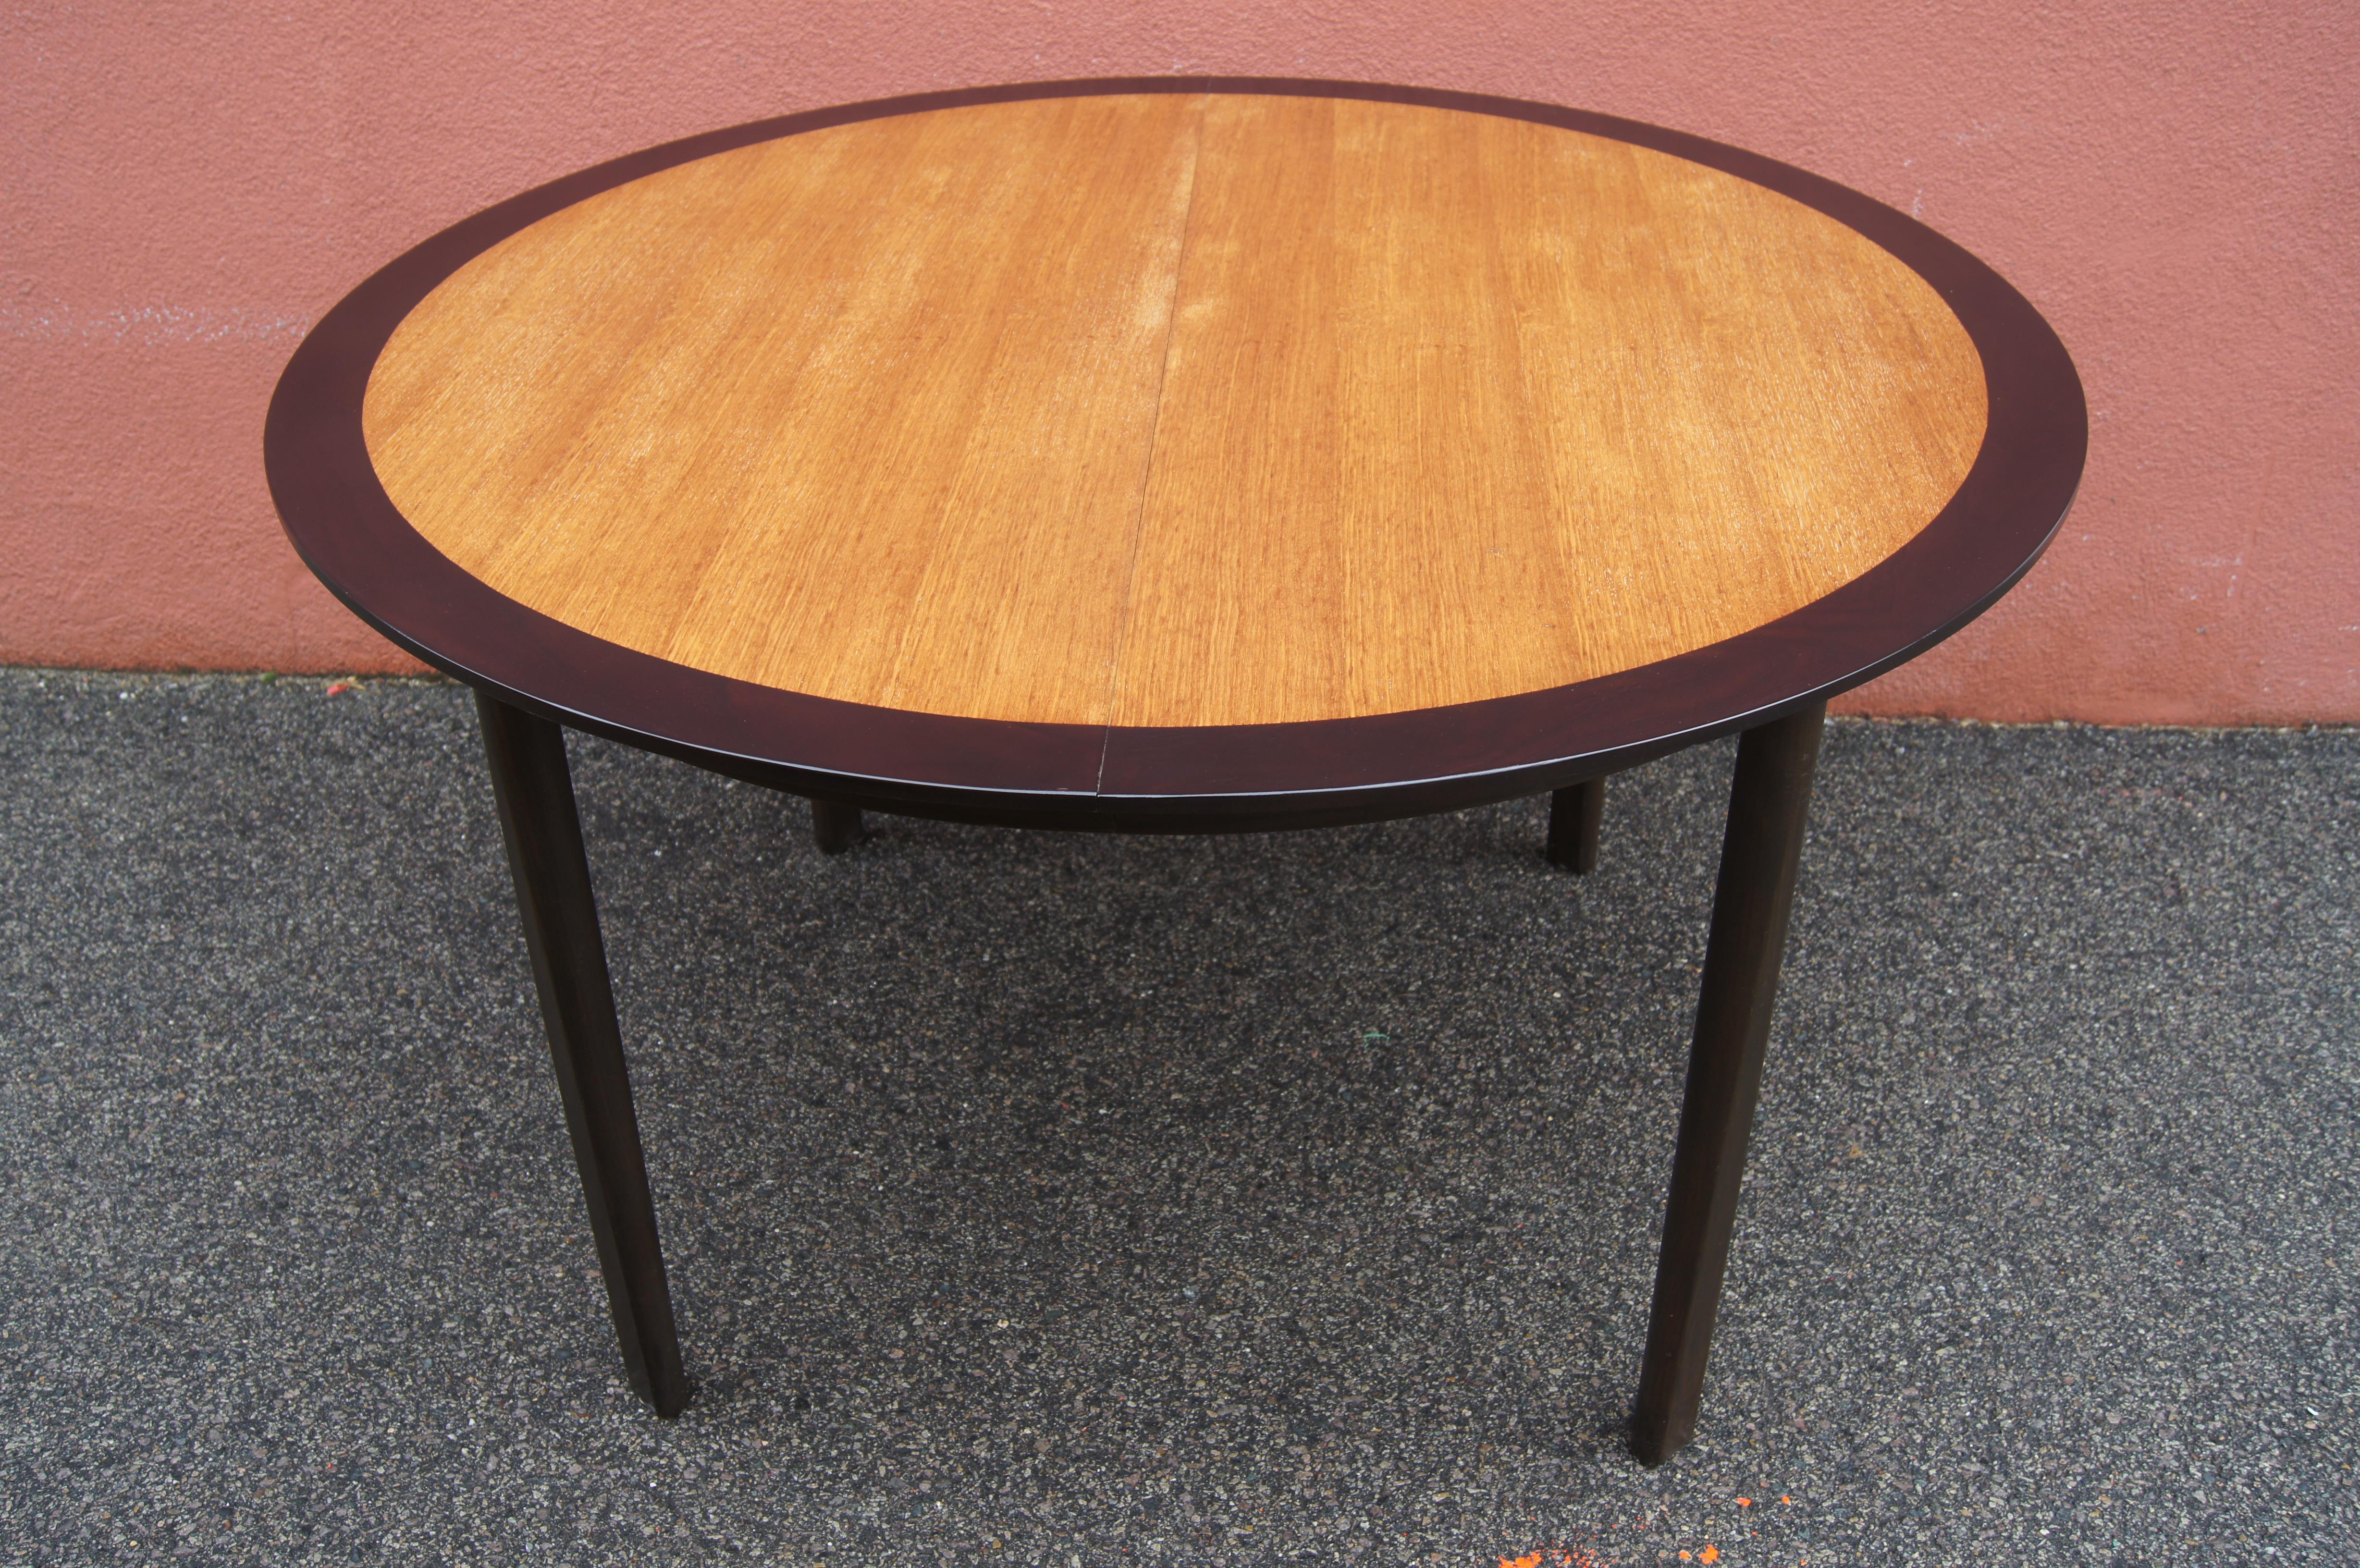 This handsome dining table by Roger Sprunger Dunbar features a wide band of ebonized walnut encircling honey-toned oak. Two 18-inch leaves allow the round table to expand to an oval of either 67.75 or 85.75 inches wide.

Metal Dunbar label